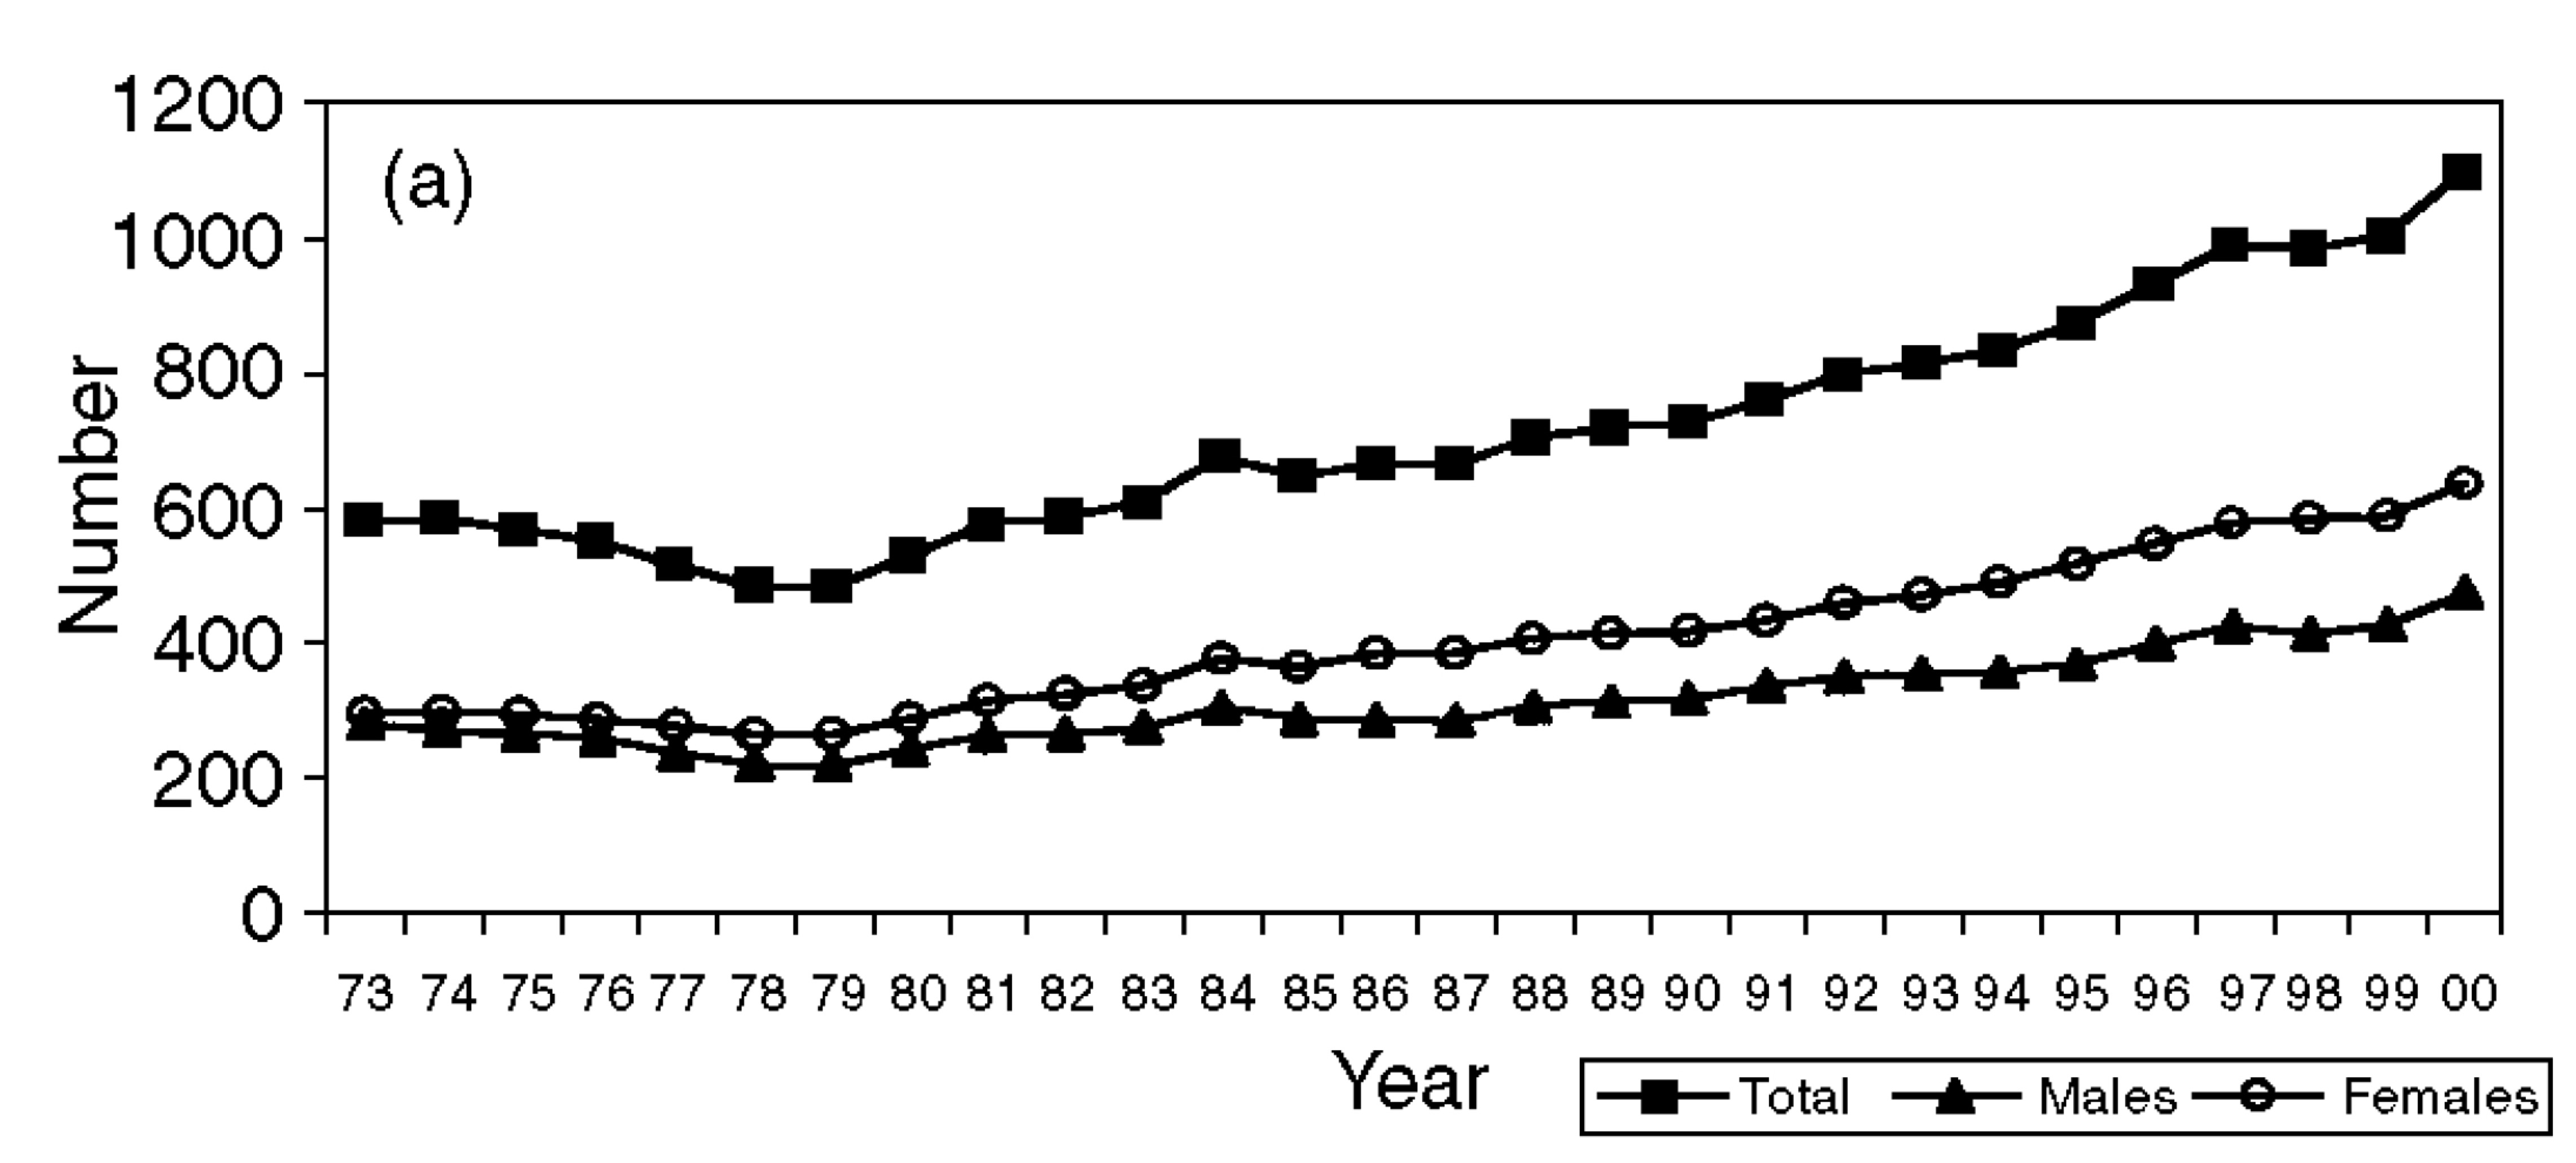 Plot of total, male, and female numbers of elephants in Amboseli, Kenya from 1973 to 1999